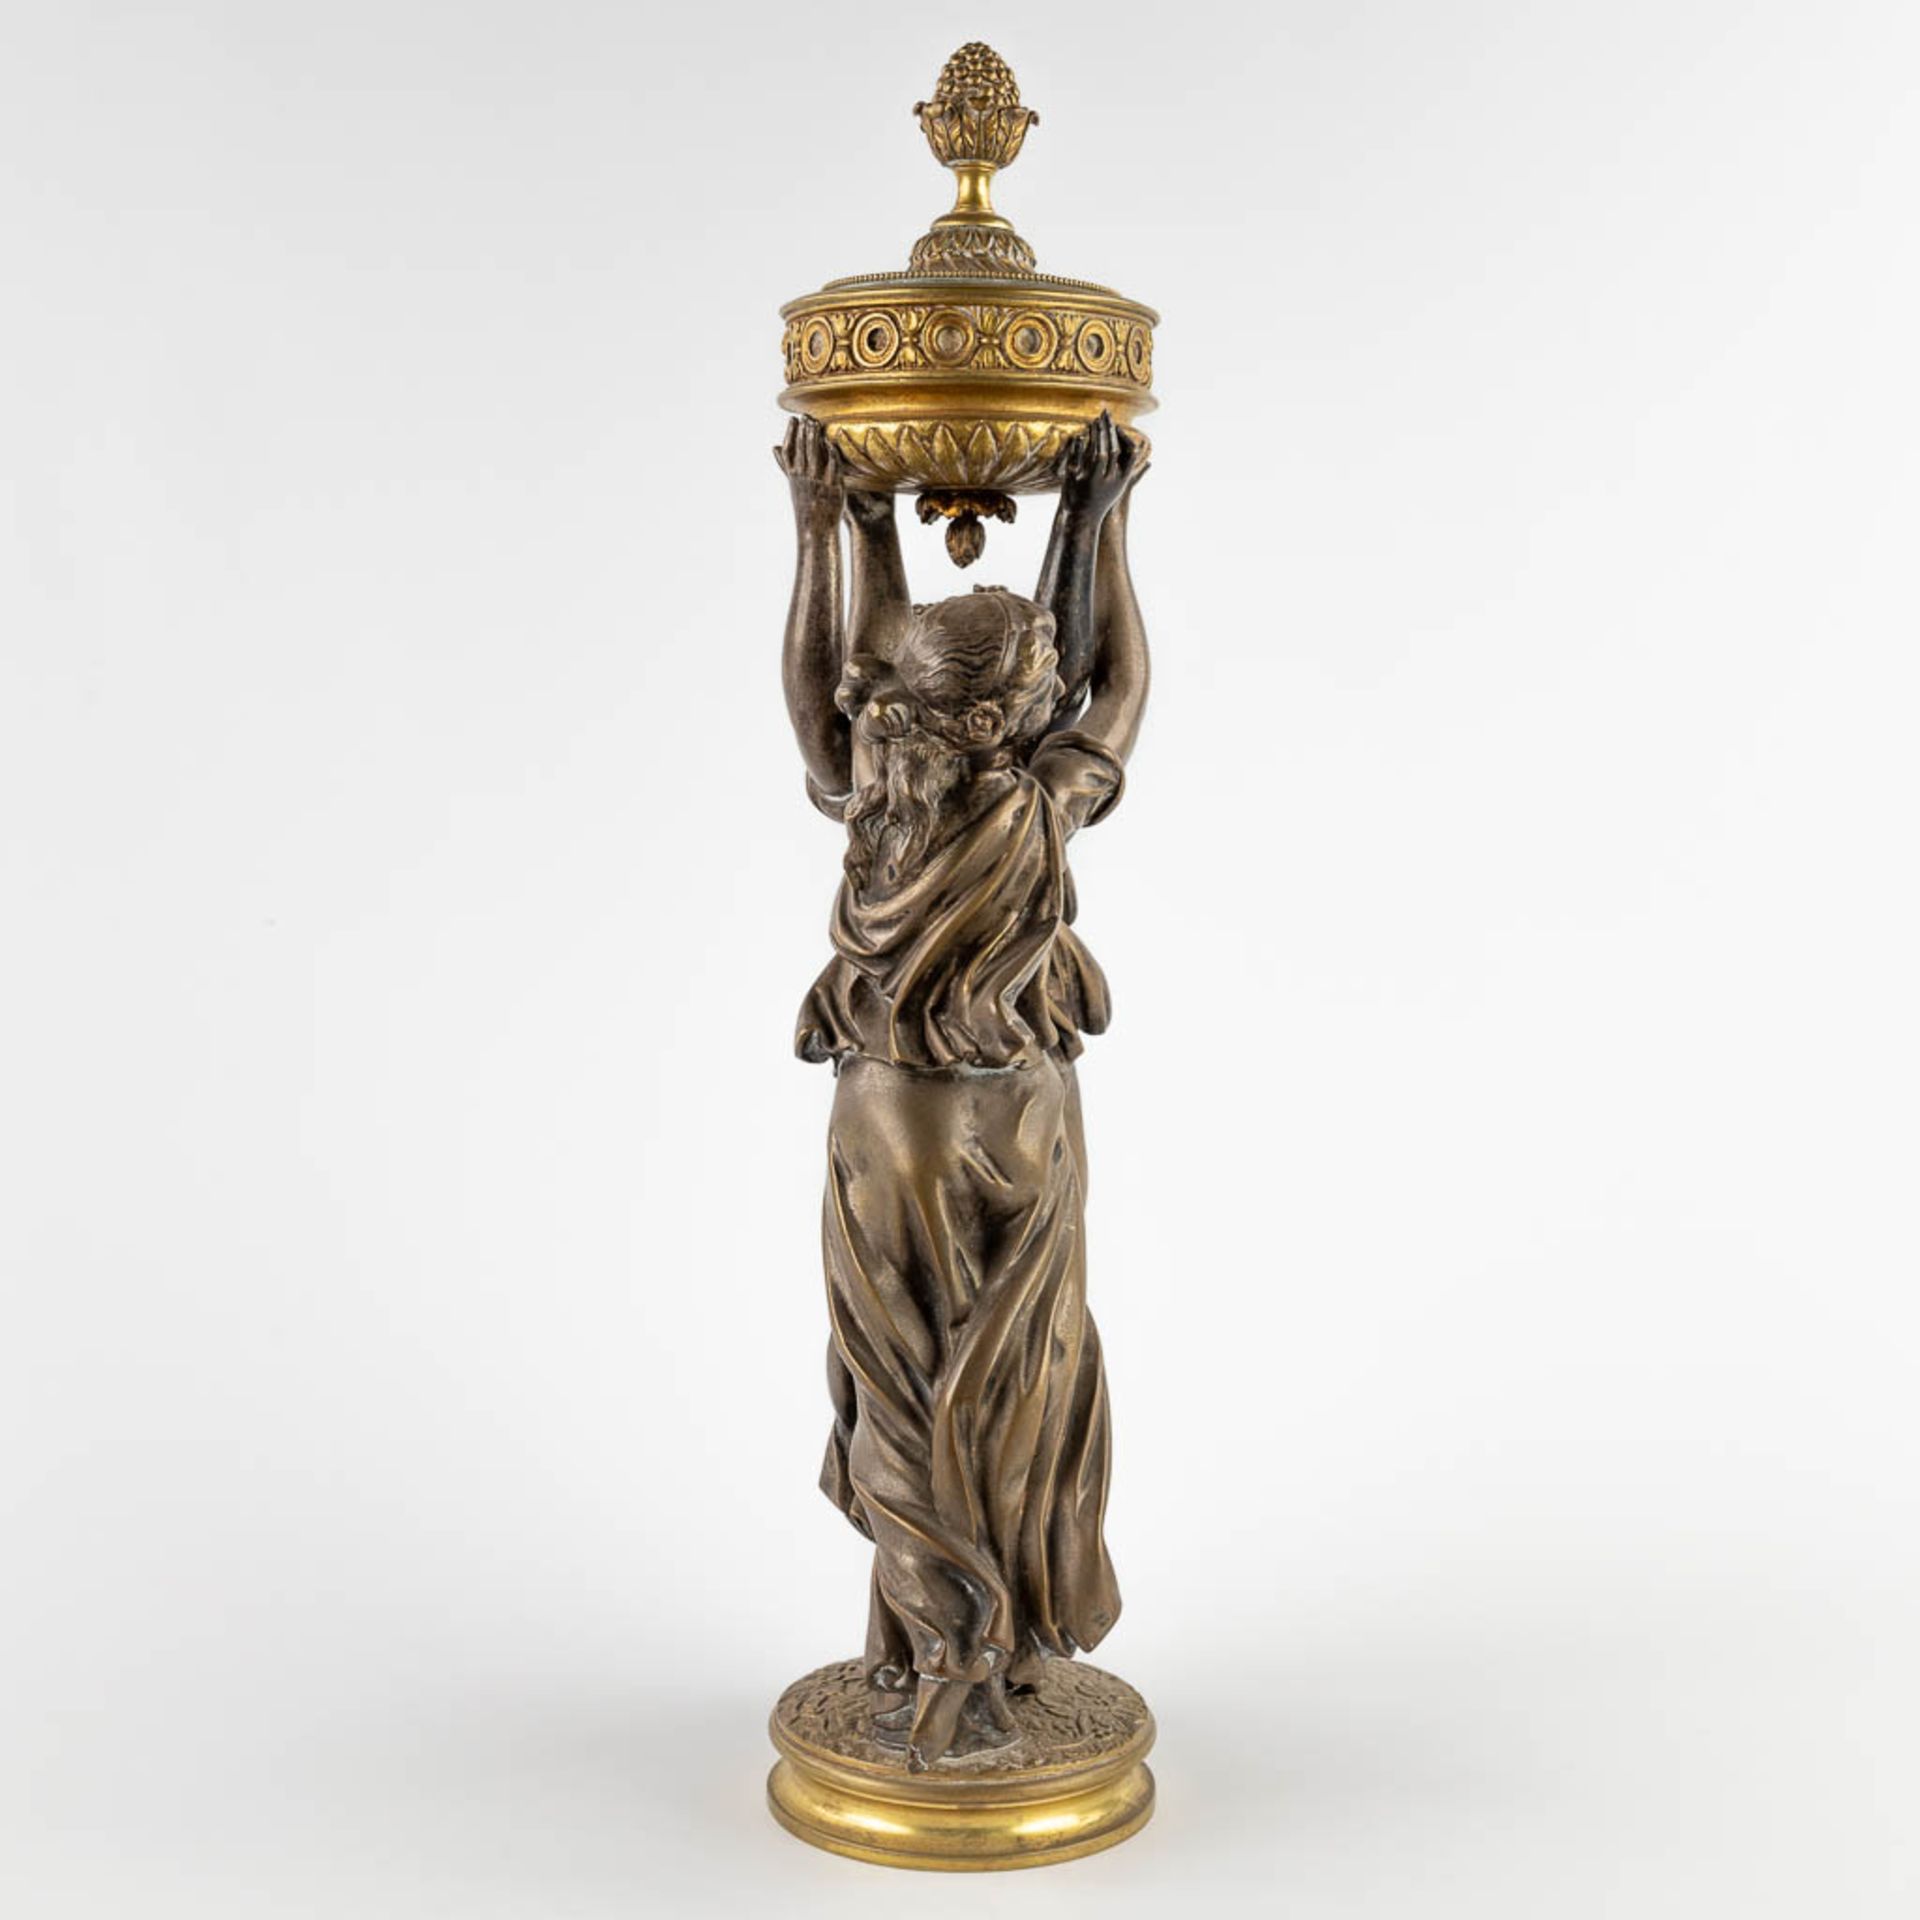 A large figurine of two graces, silver-plated and polished bronze. 19th C. (D:10 x W:18 x H:53 cm) - Image 3 of 11